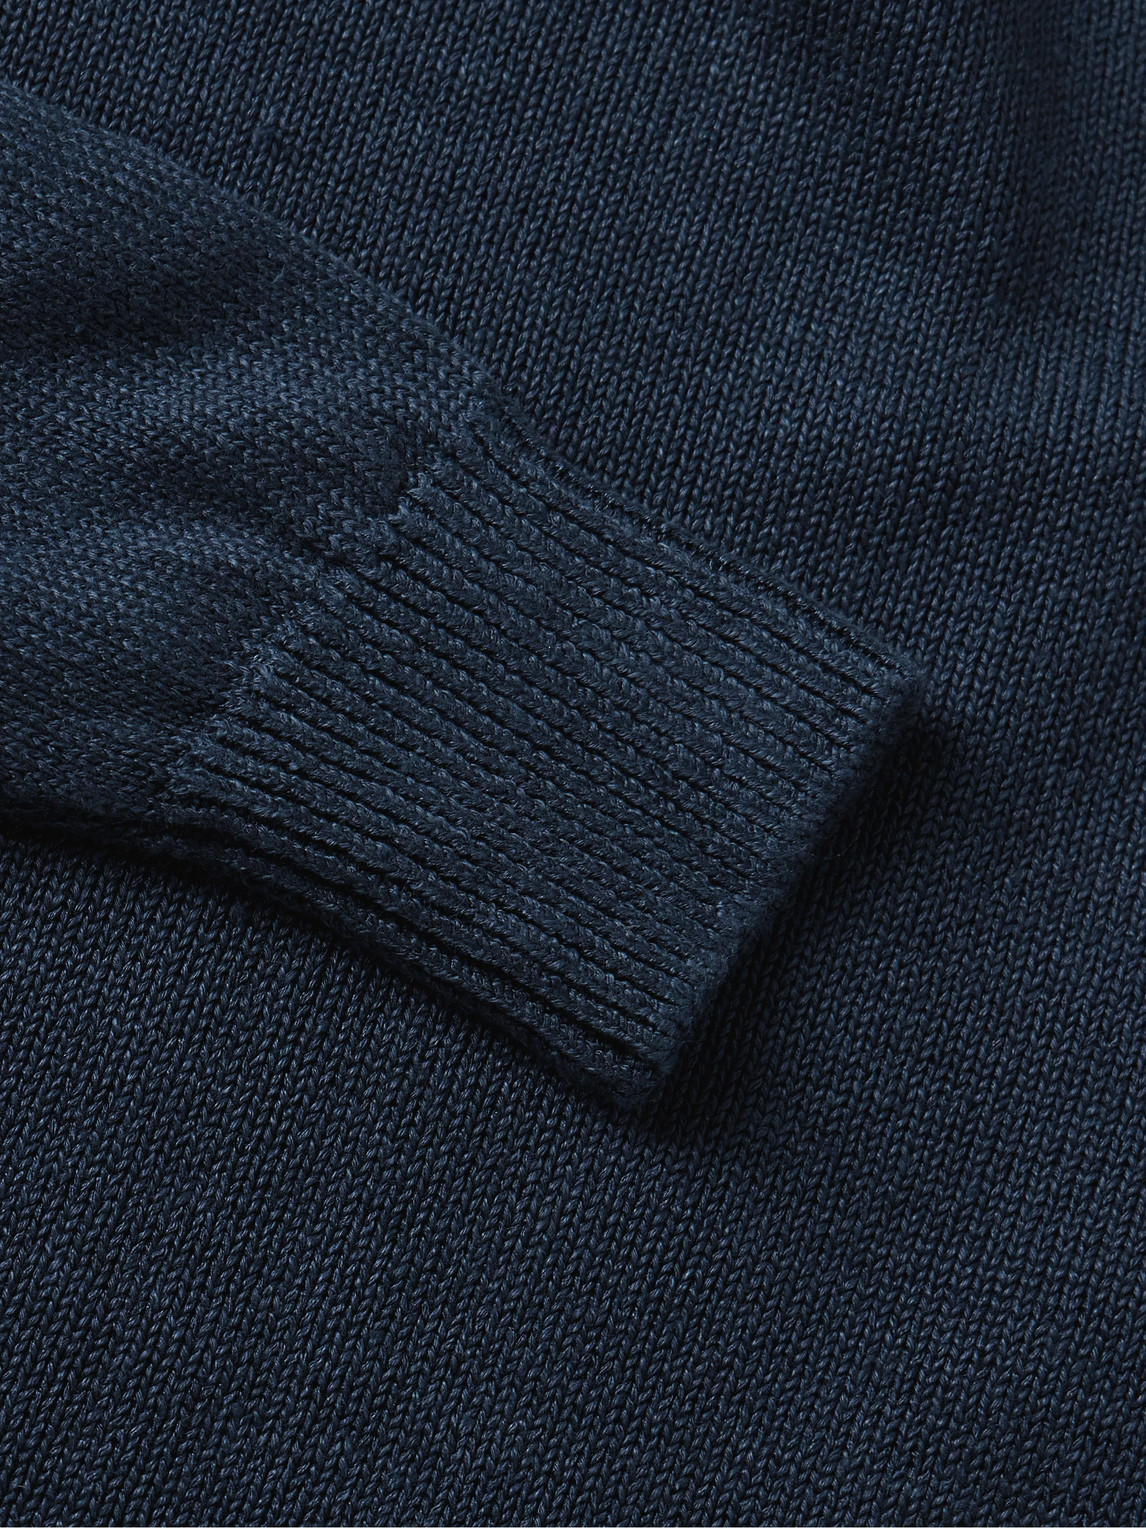 Shop Inis Meain Linen Sweater In Blue